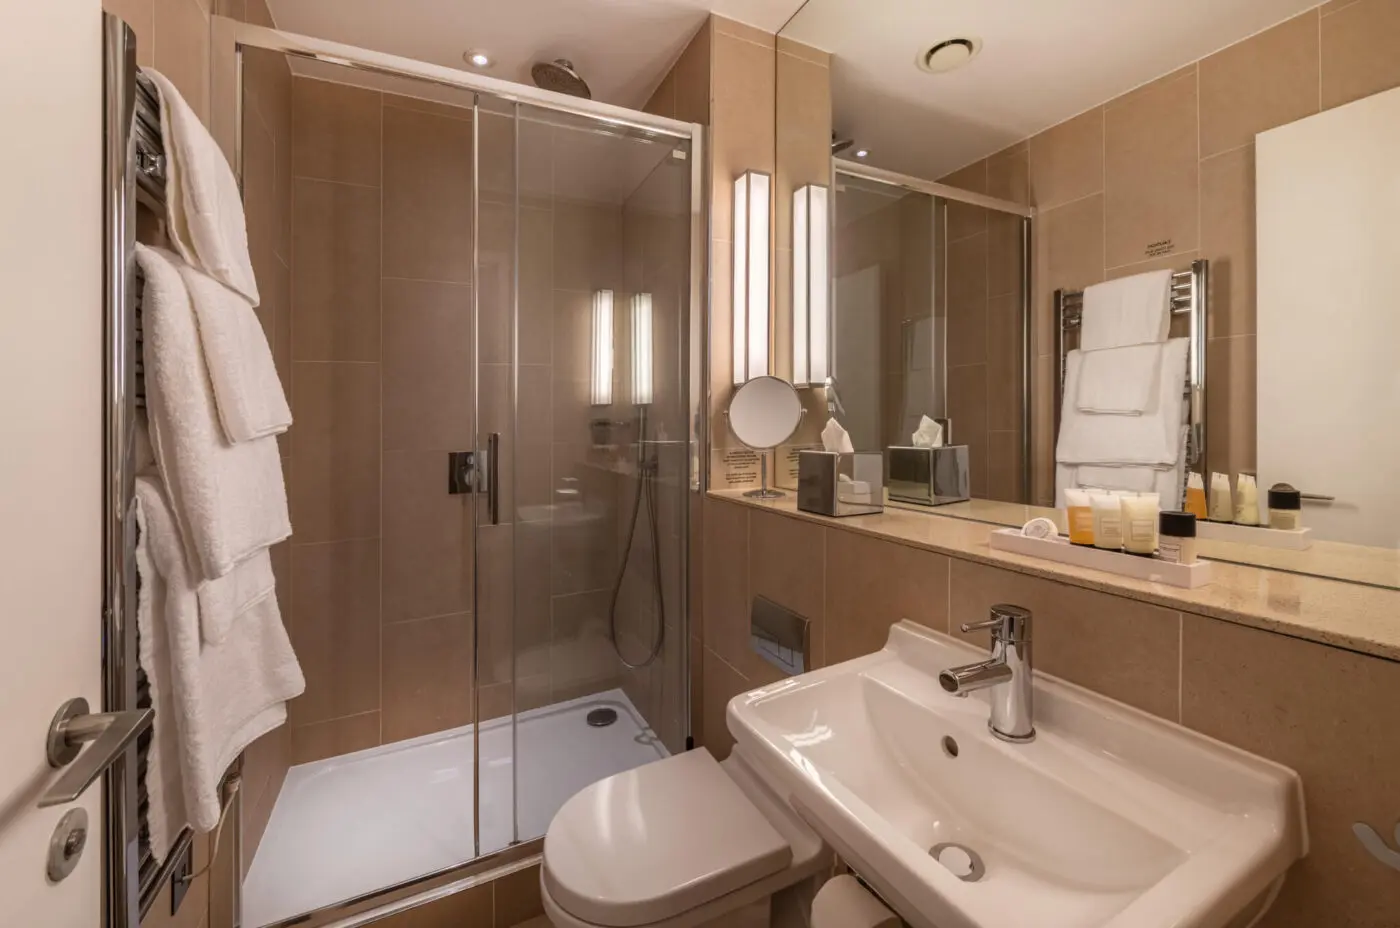 A small bathroom with a walk-in shower, located in Victoria.